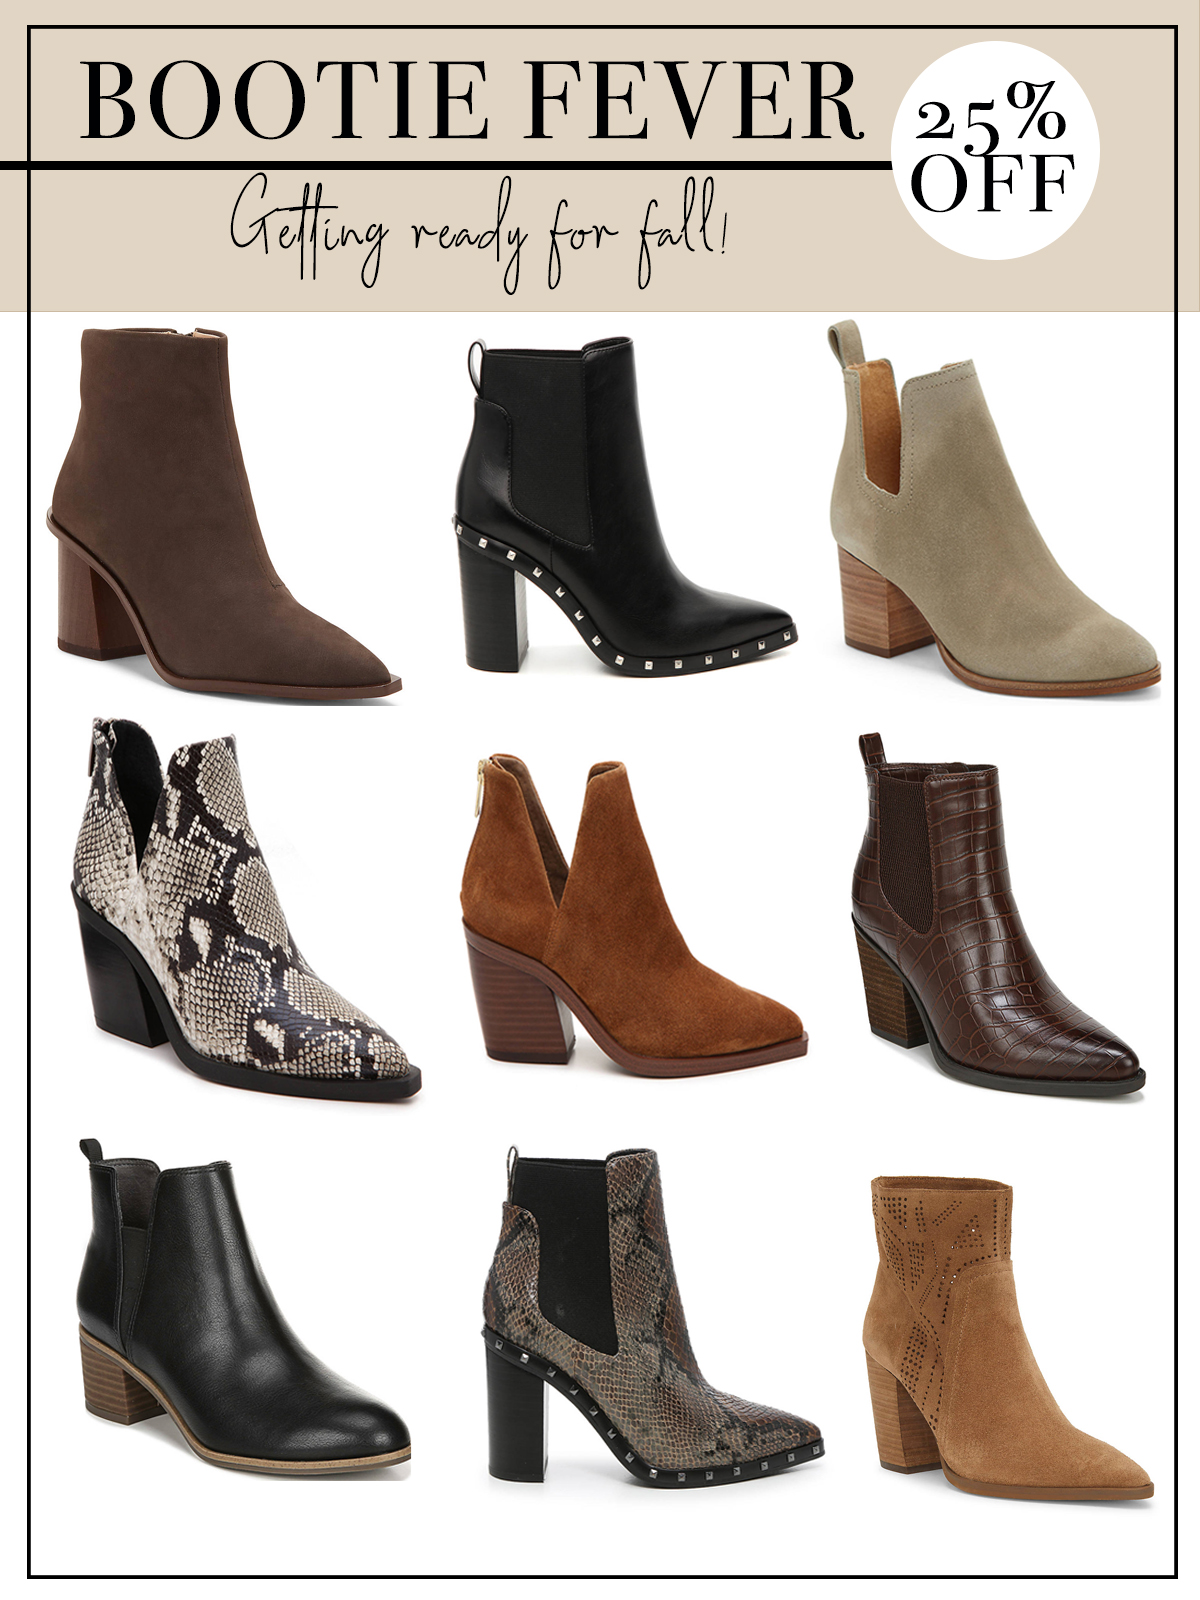 Ankle boots for fall via DSW.